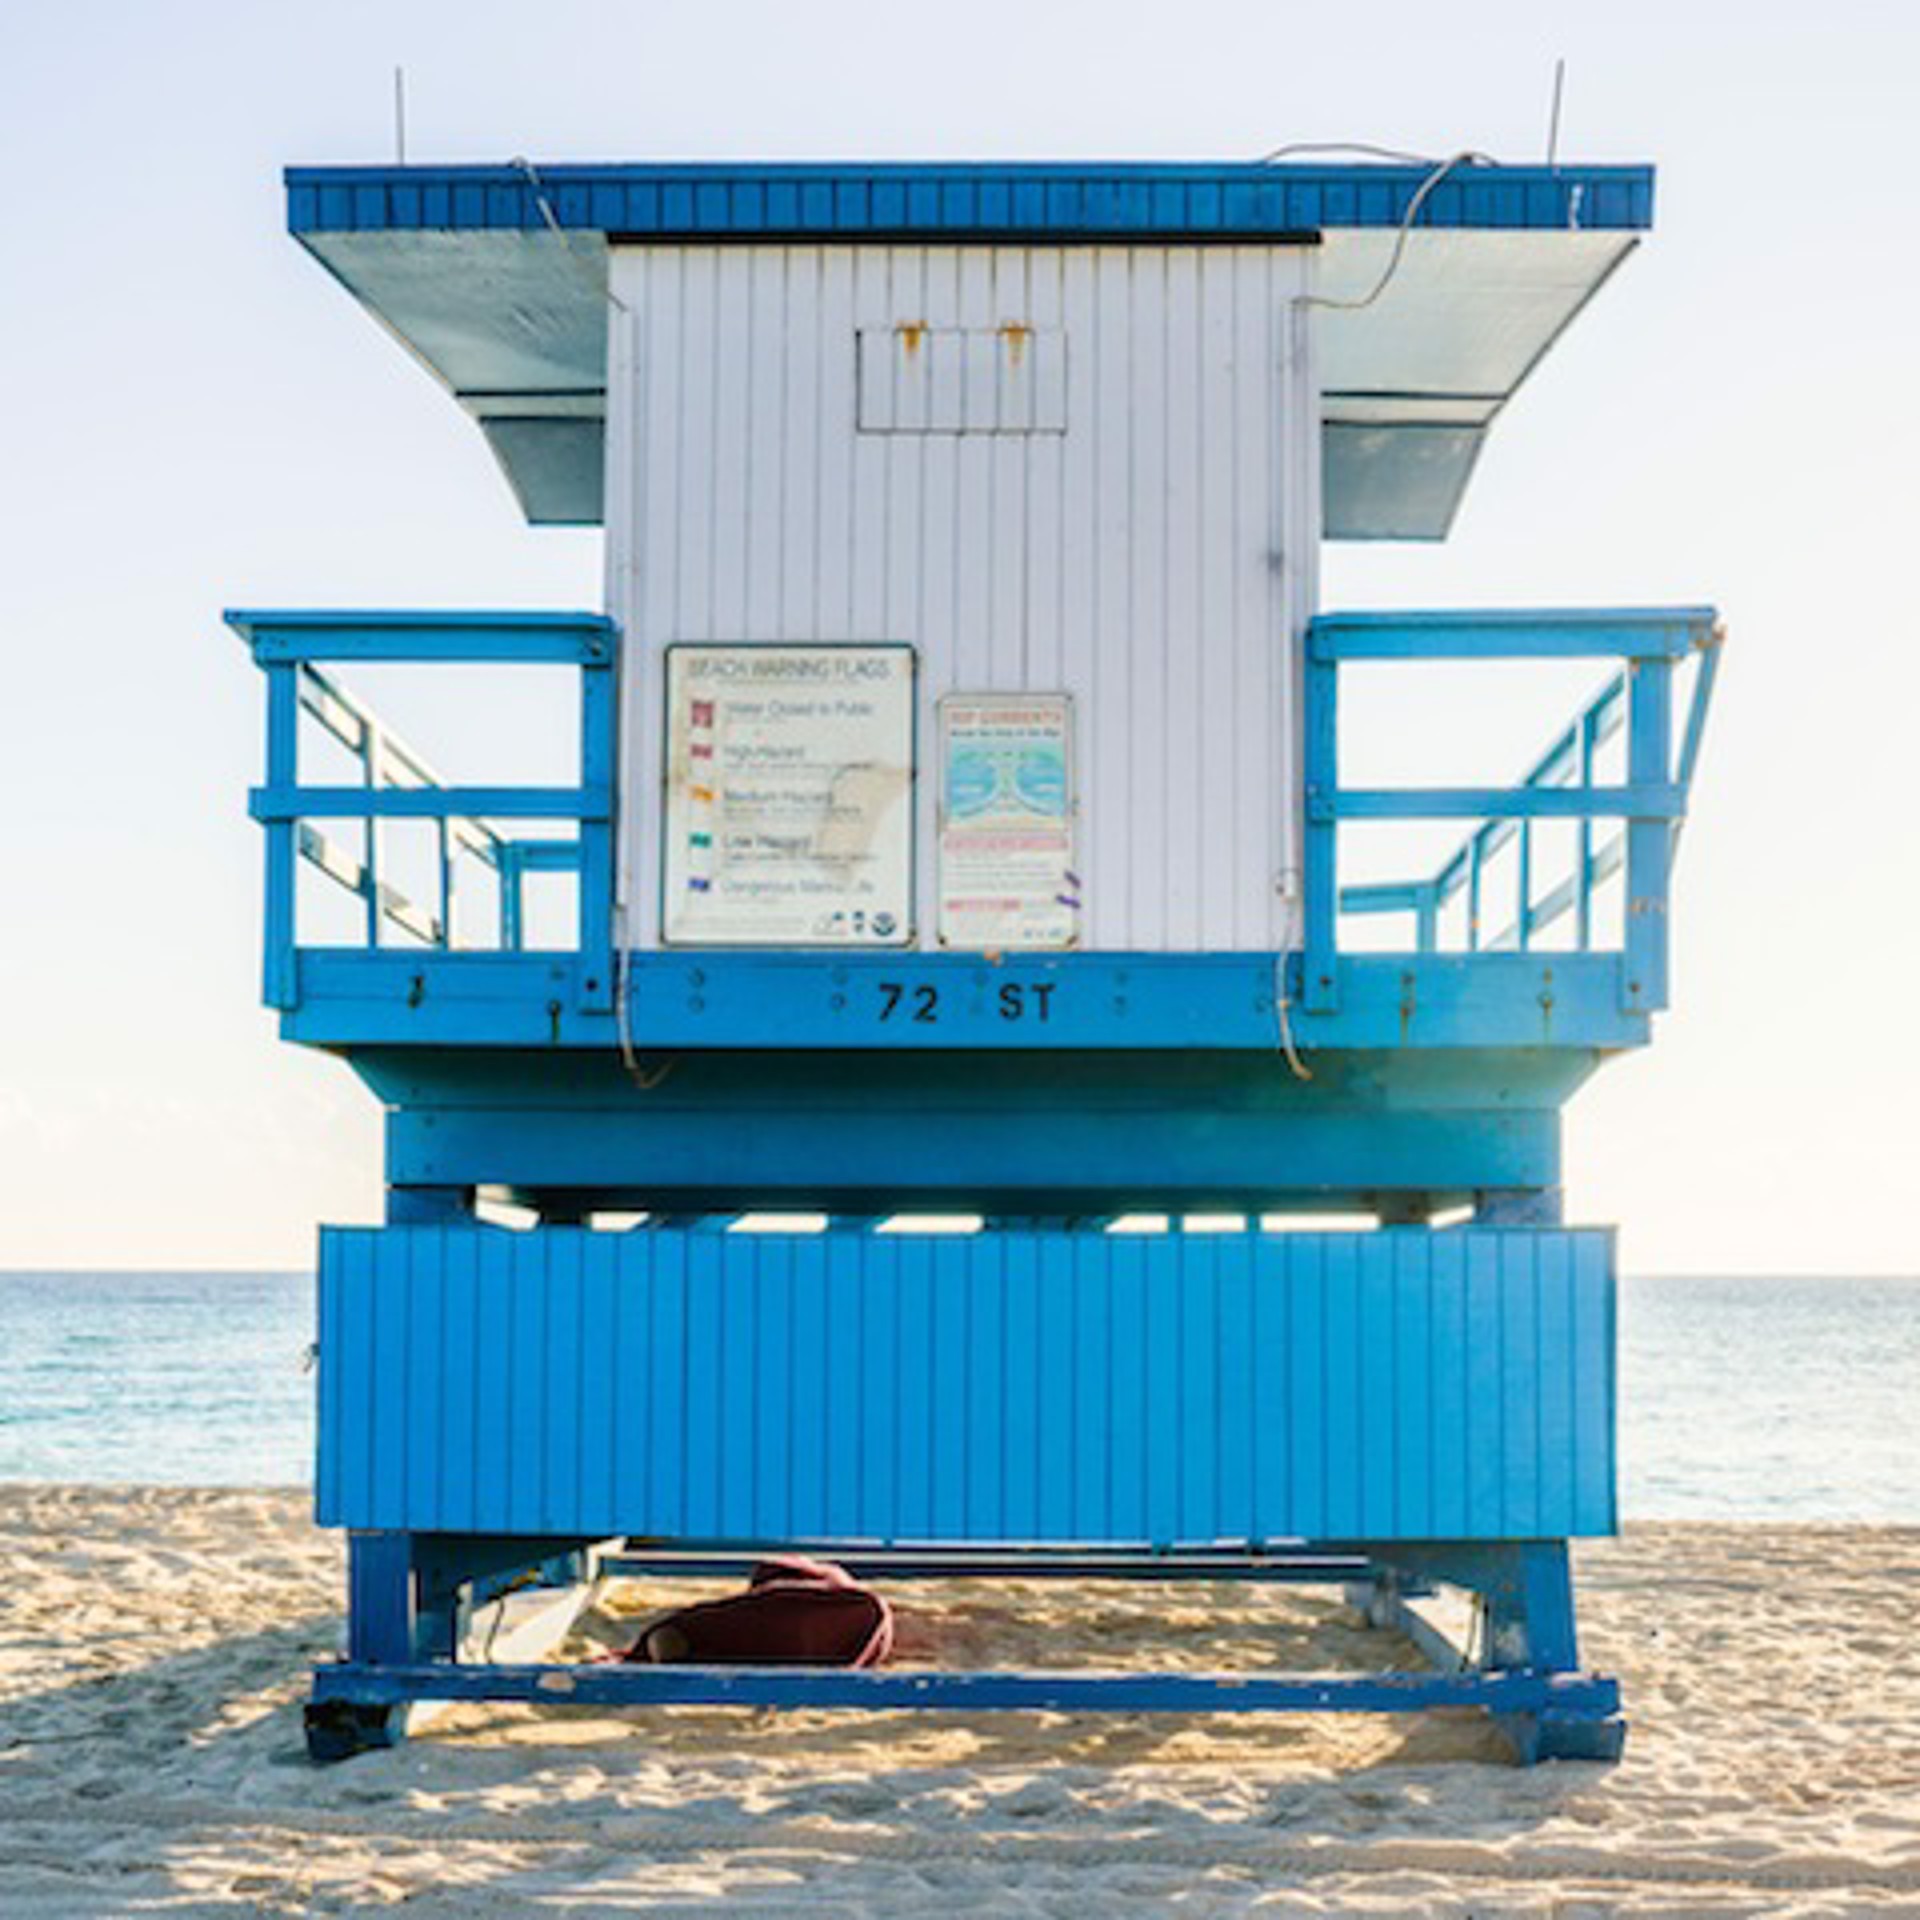 72nd Street Lifeguard Stand, Rear View by Peter Mendelson